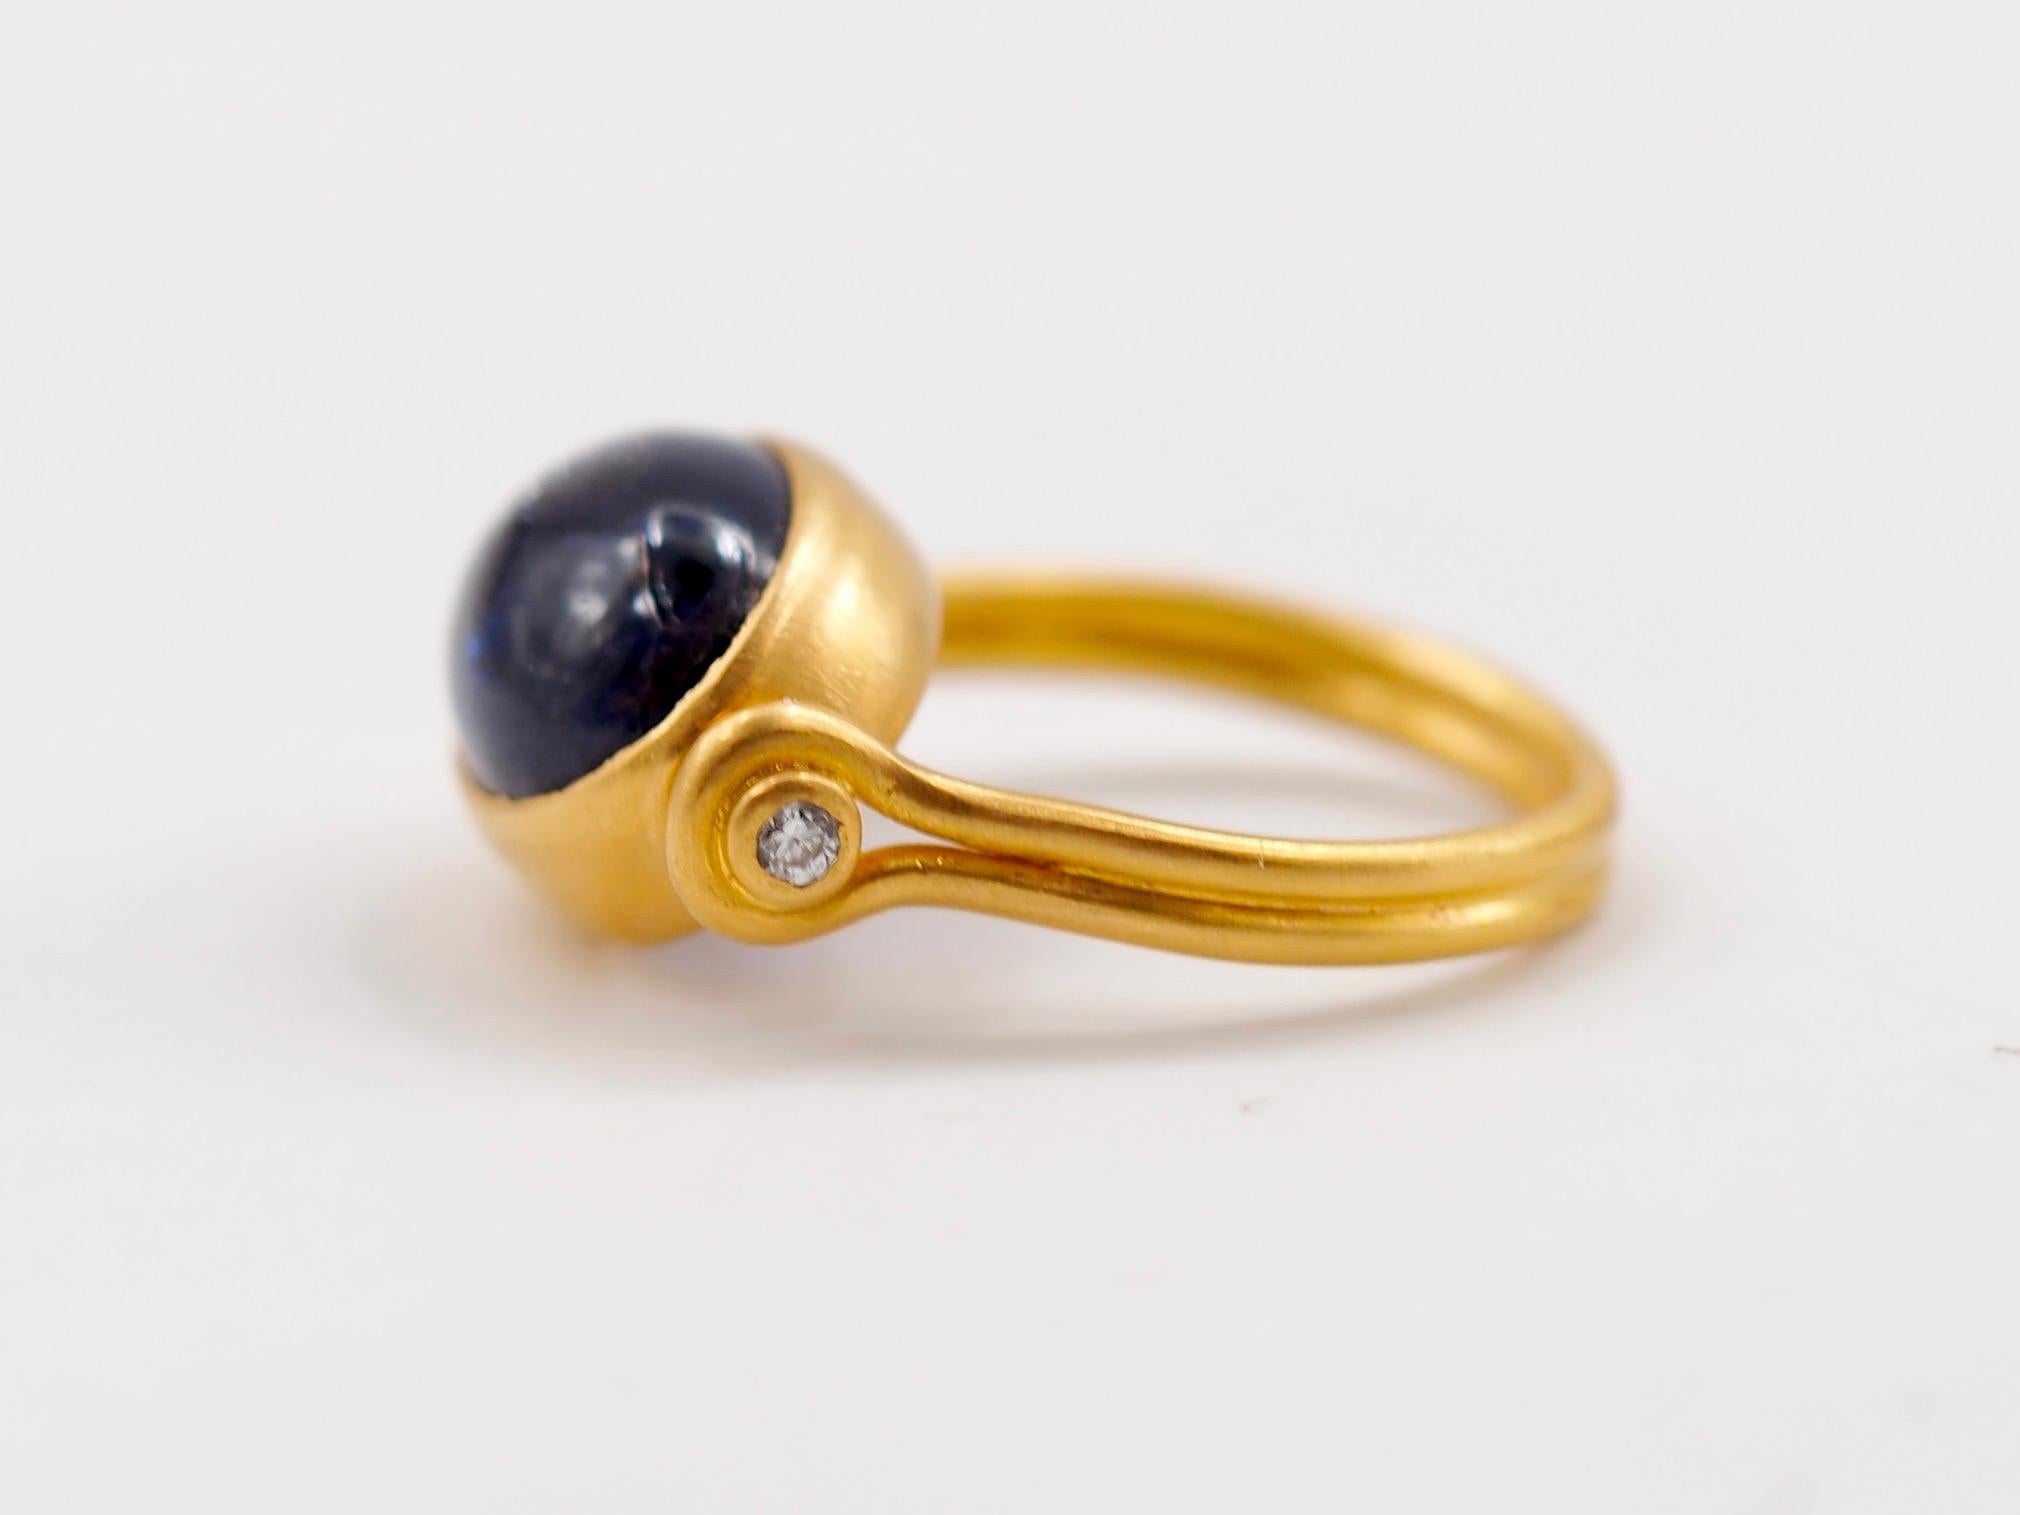 This antic style ring by Scrives is set with a iolite cabochon of 3.91 cts. The iolite has a dense dark blue colour with silver glitters on the top that reflect the light and give a silver glow to the stone. The stone is very special, natural and